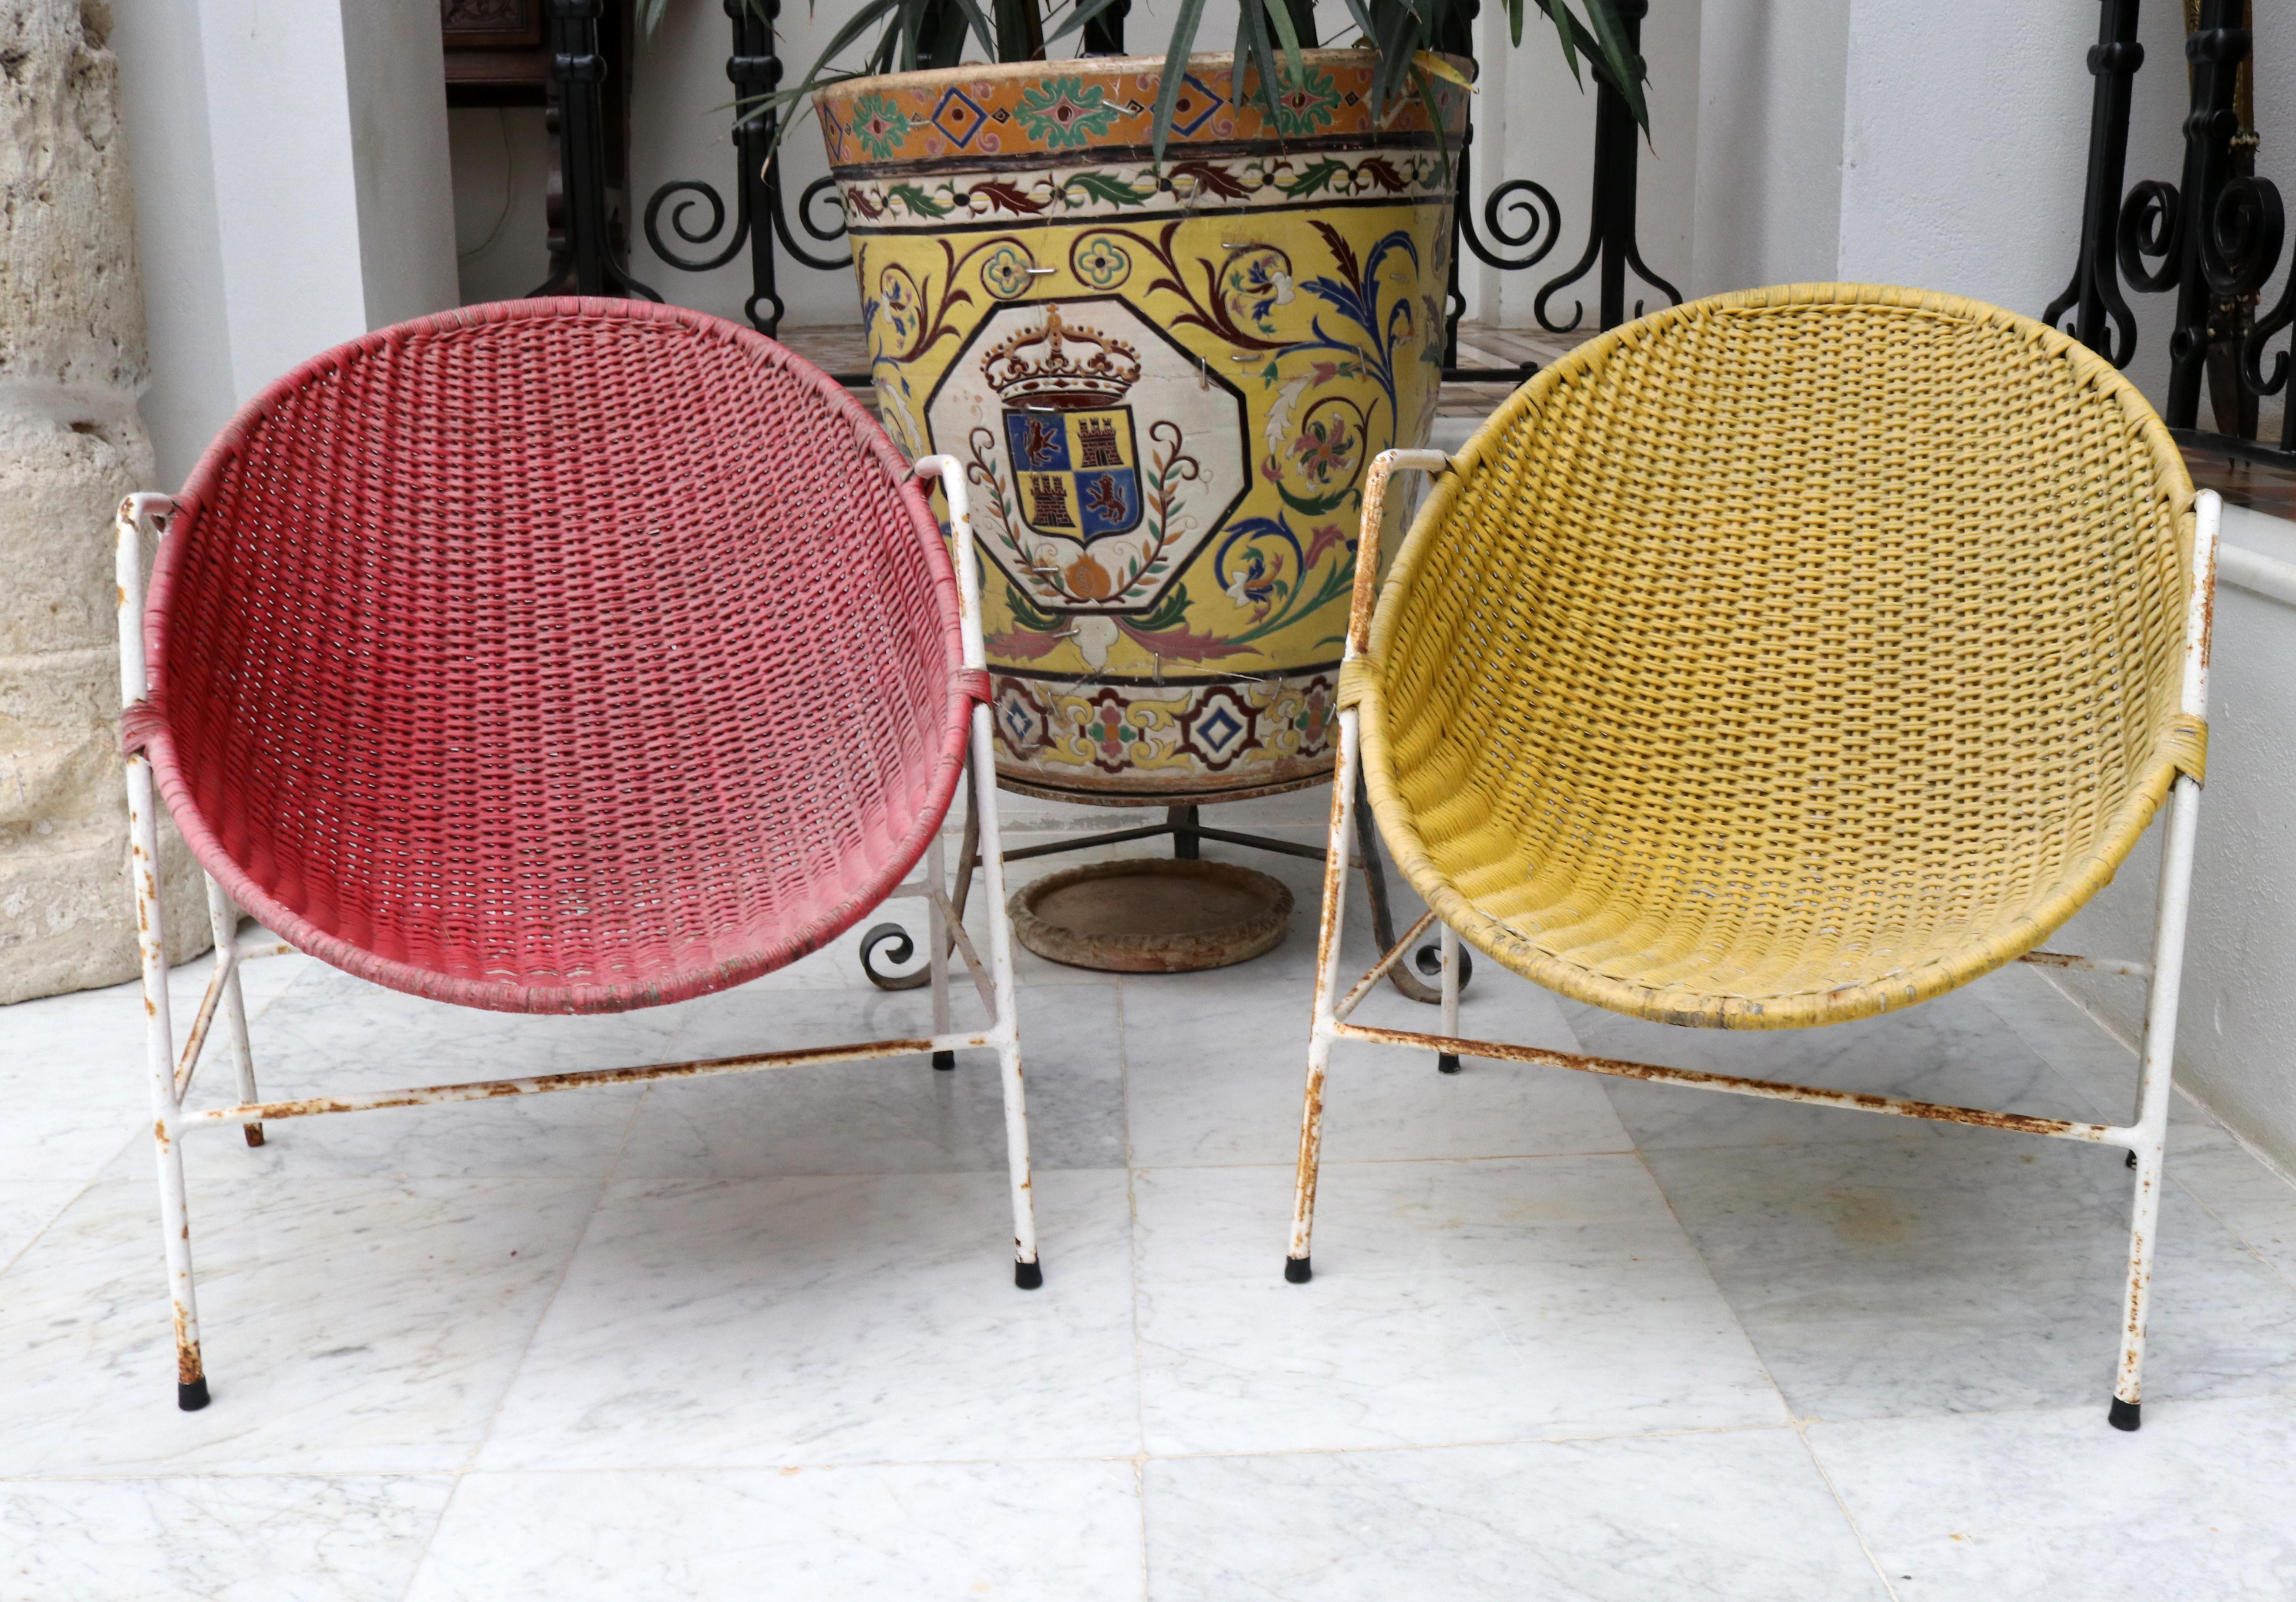 1950s Spanish red and yellow handwoven willow wicker armchairs with iron frame.